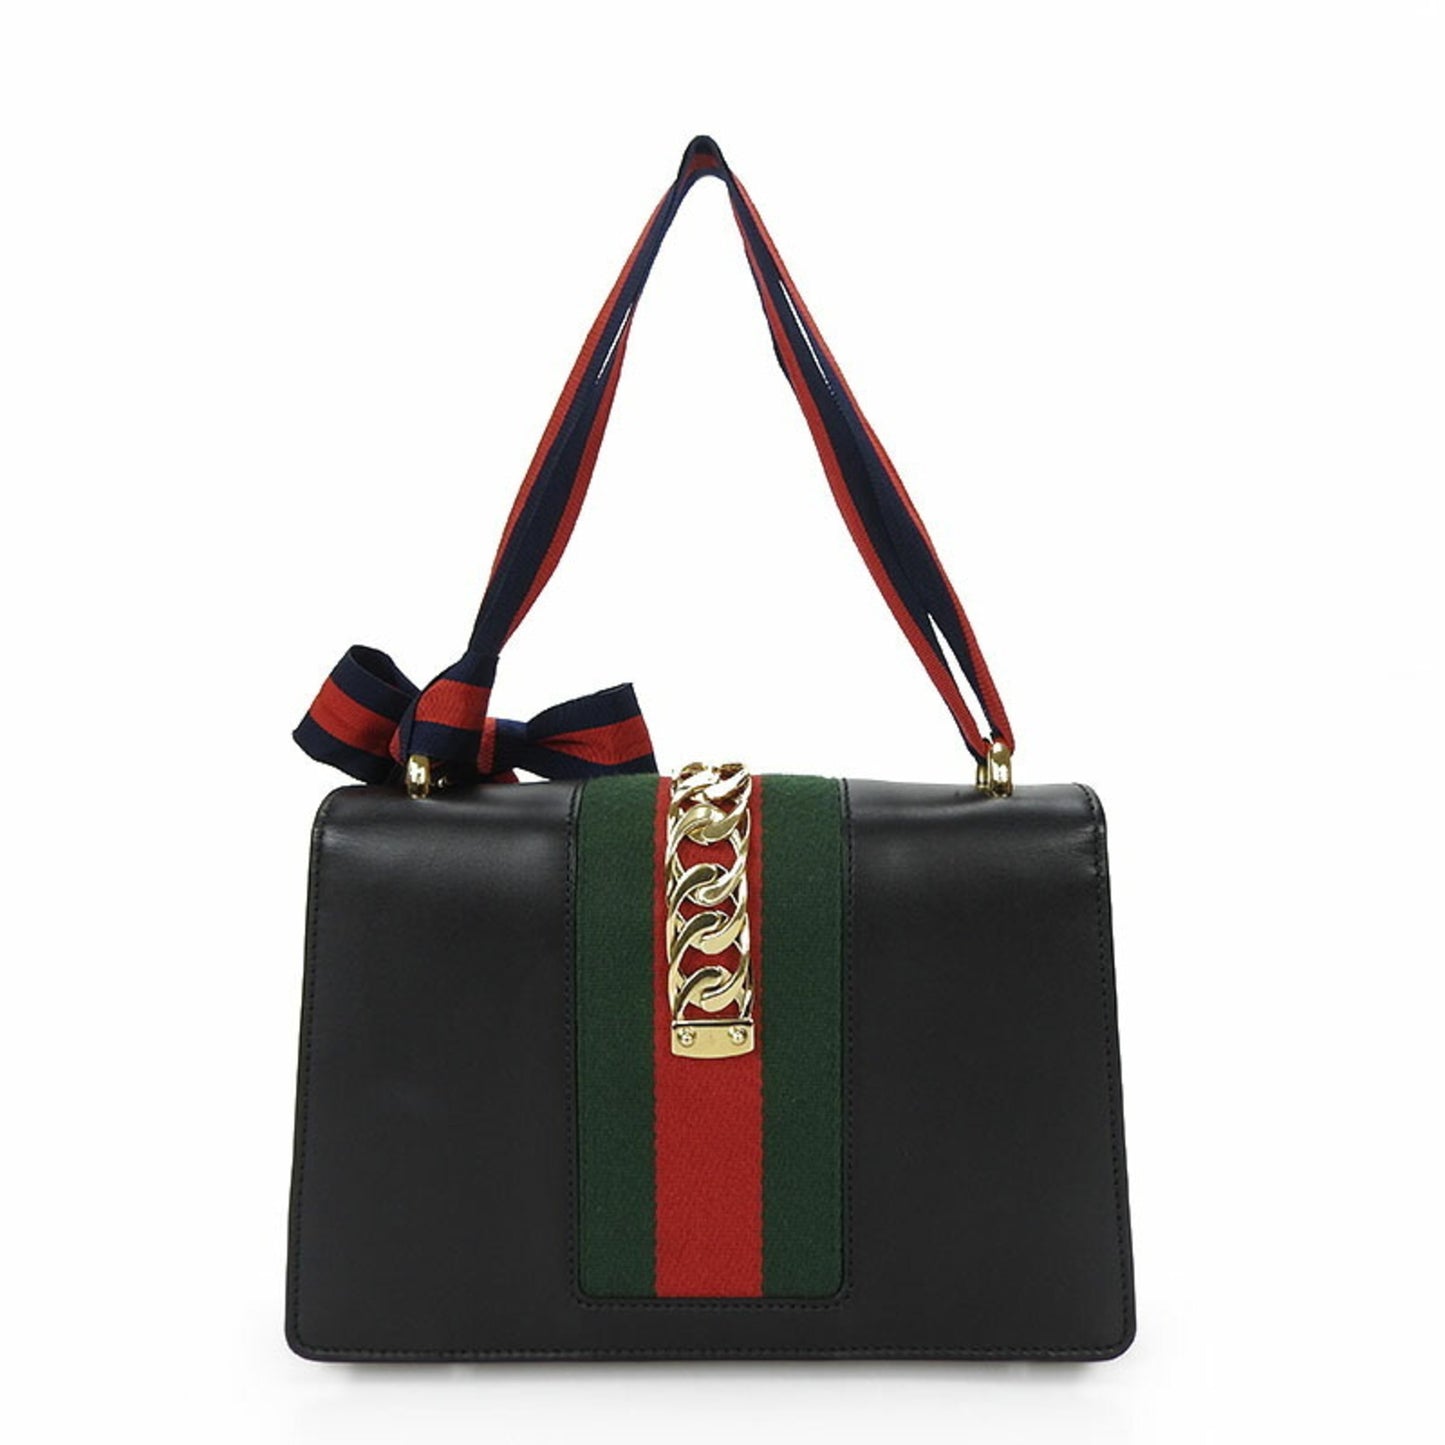 Gucci Women's Sophisticated Leather Tote Bag in Black